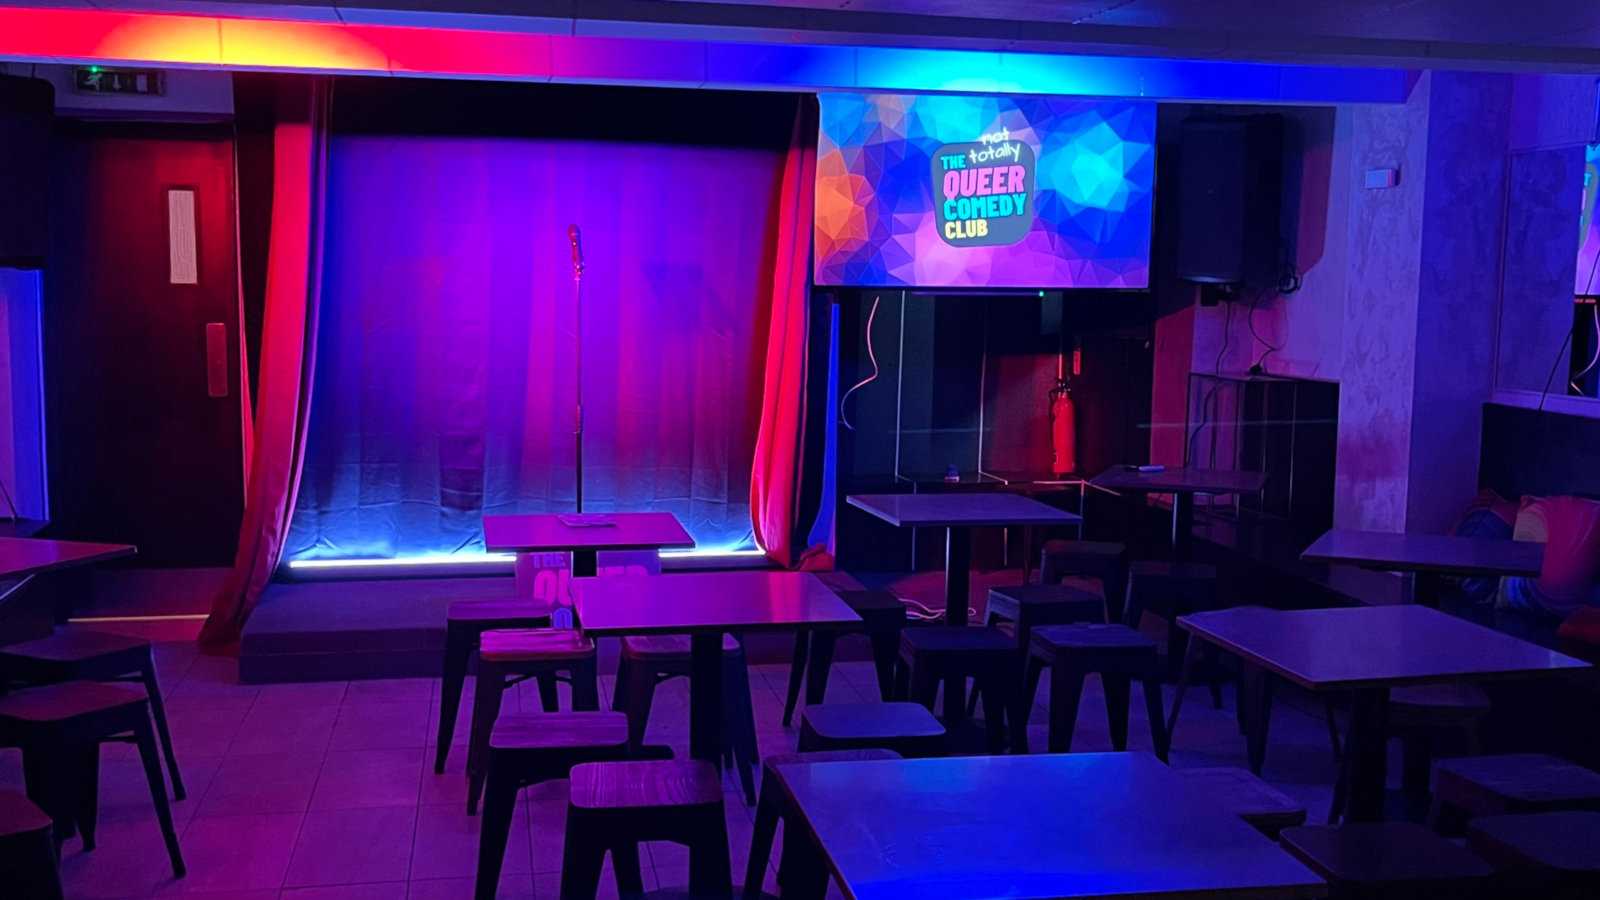 An empty stage at the Queer Comedy Club in London all lit up and ready to fill up with an audience and performers.